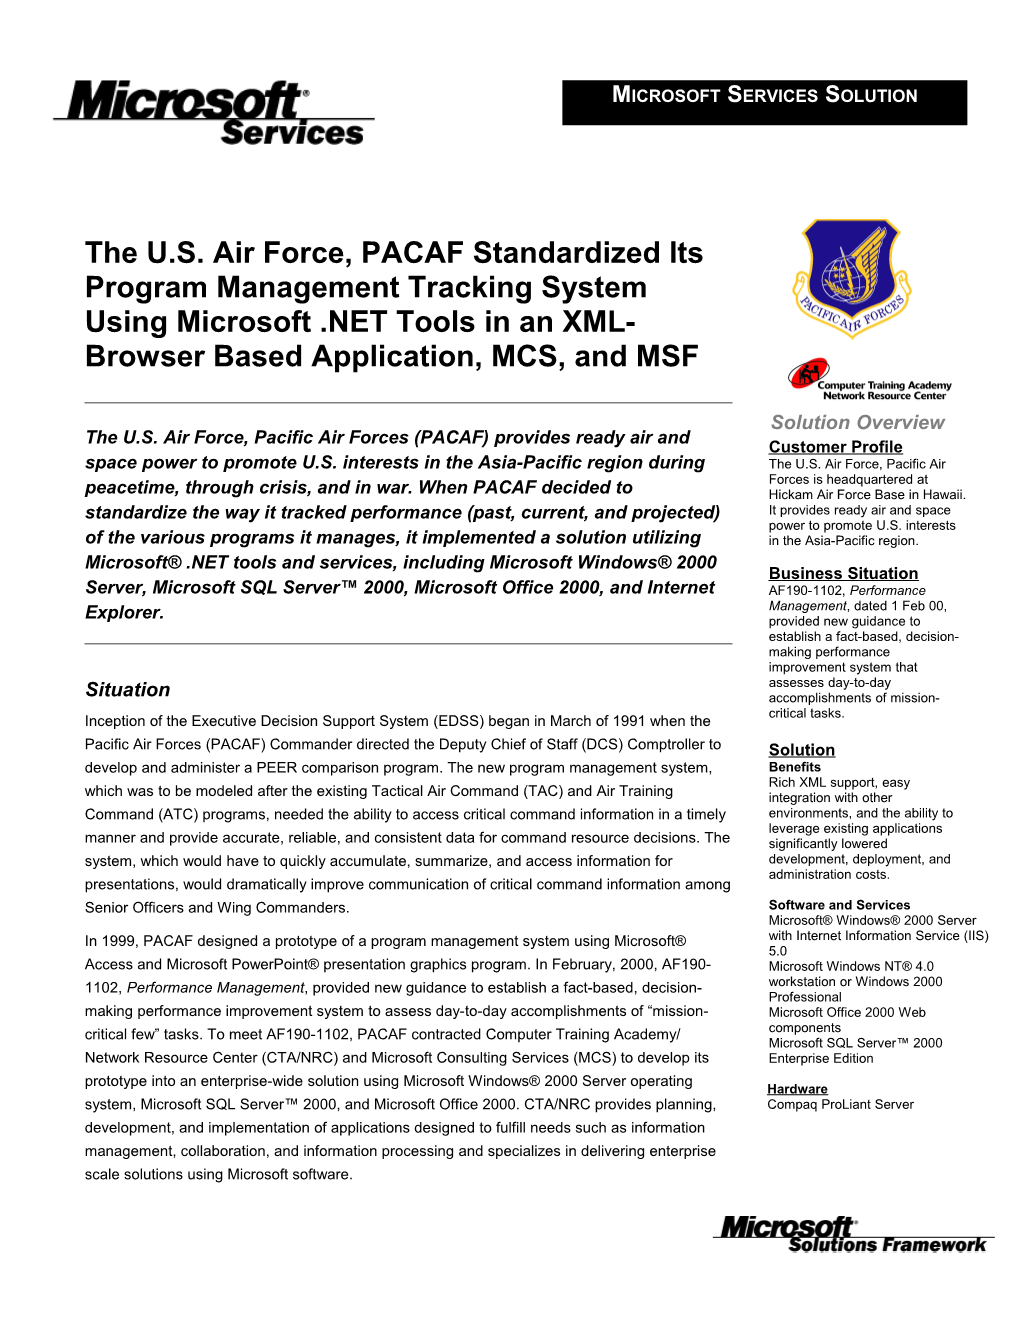 The U.S. Air Force, PACAF Standardized Its Program Management Tracking System Using Microsoft